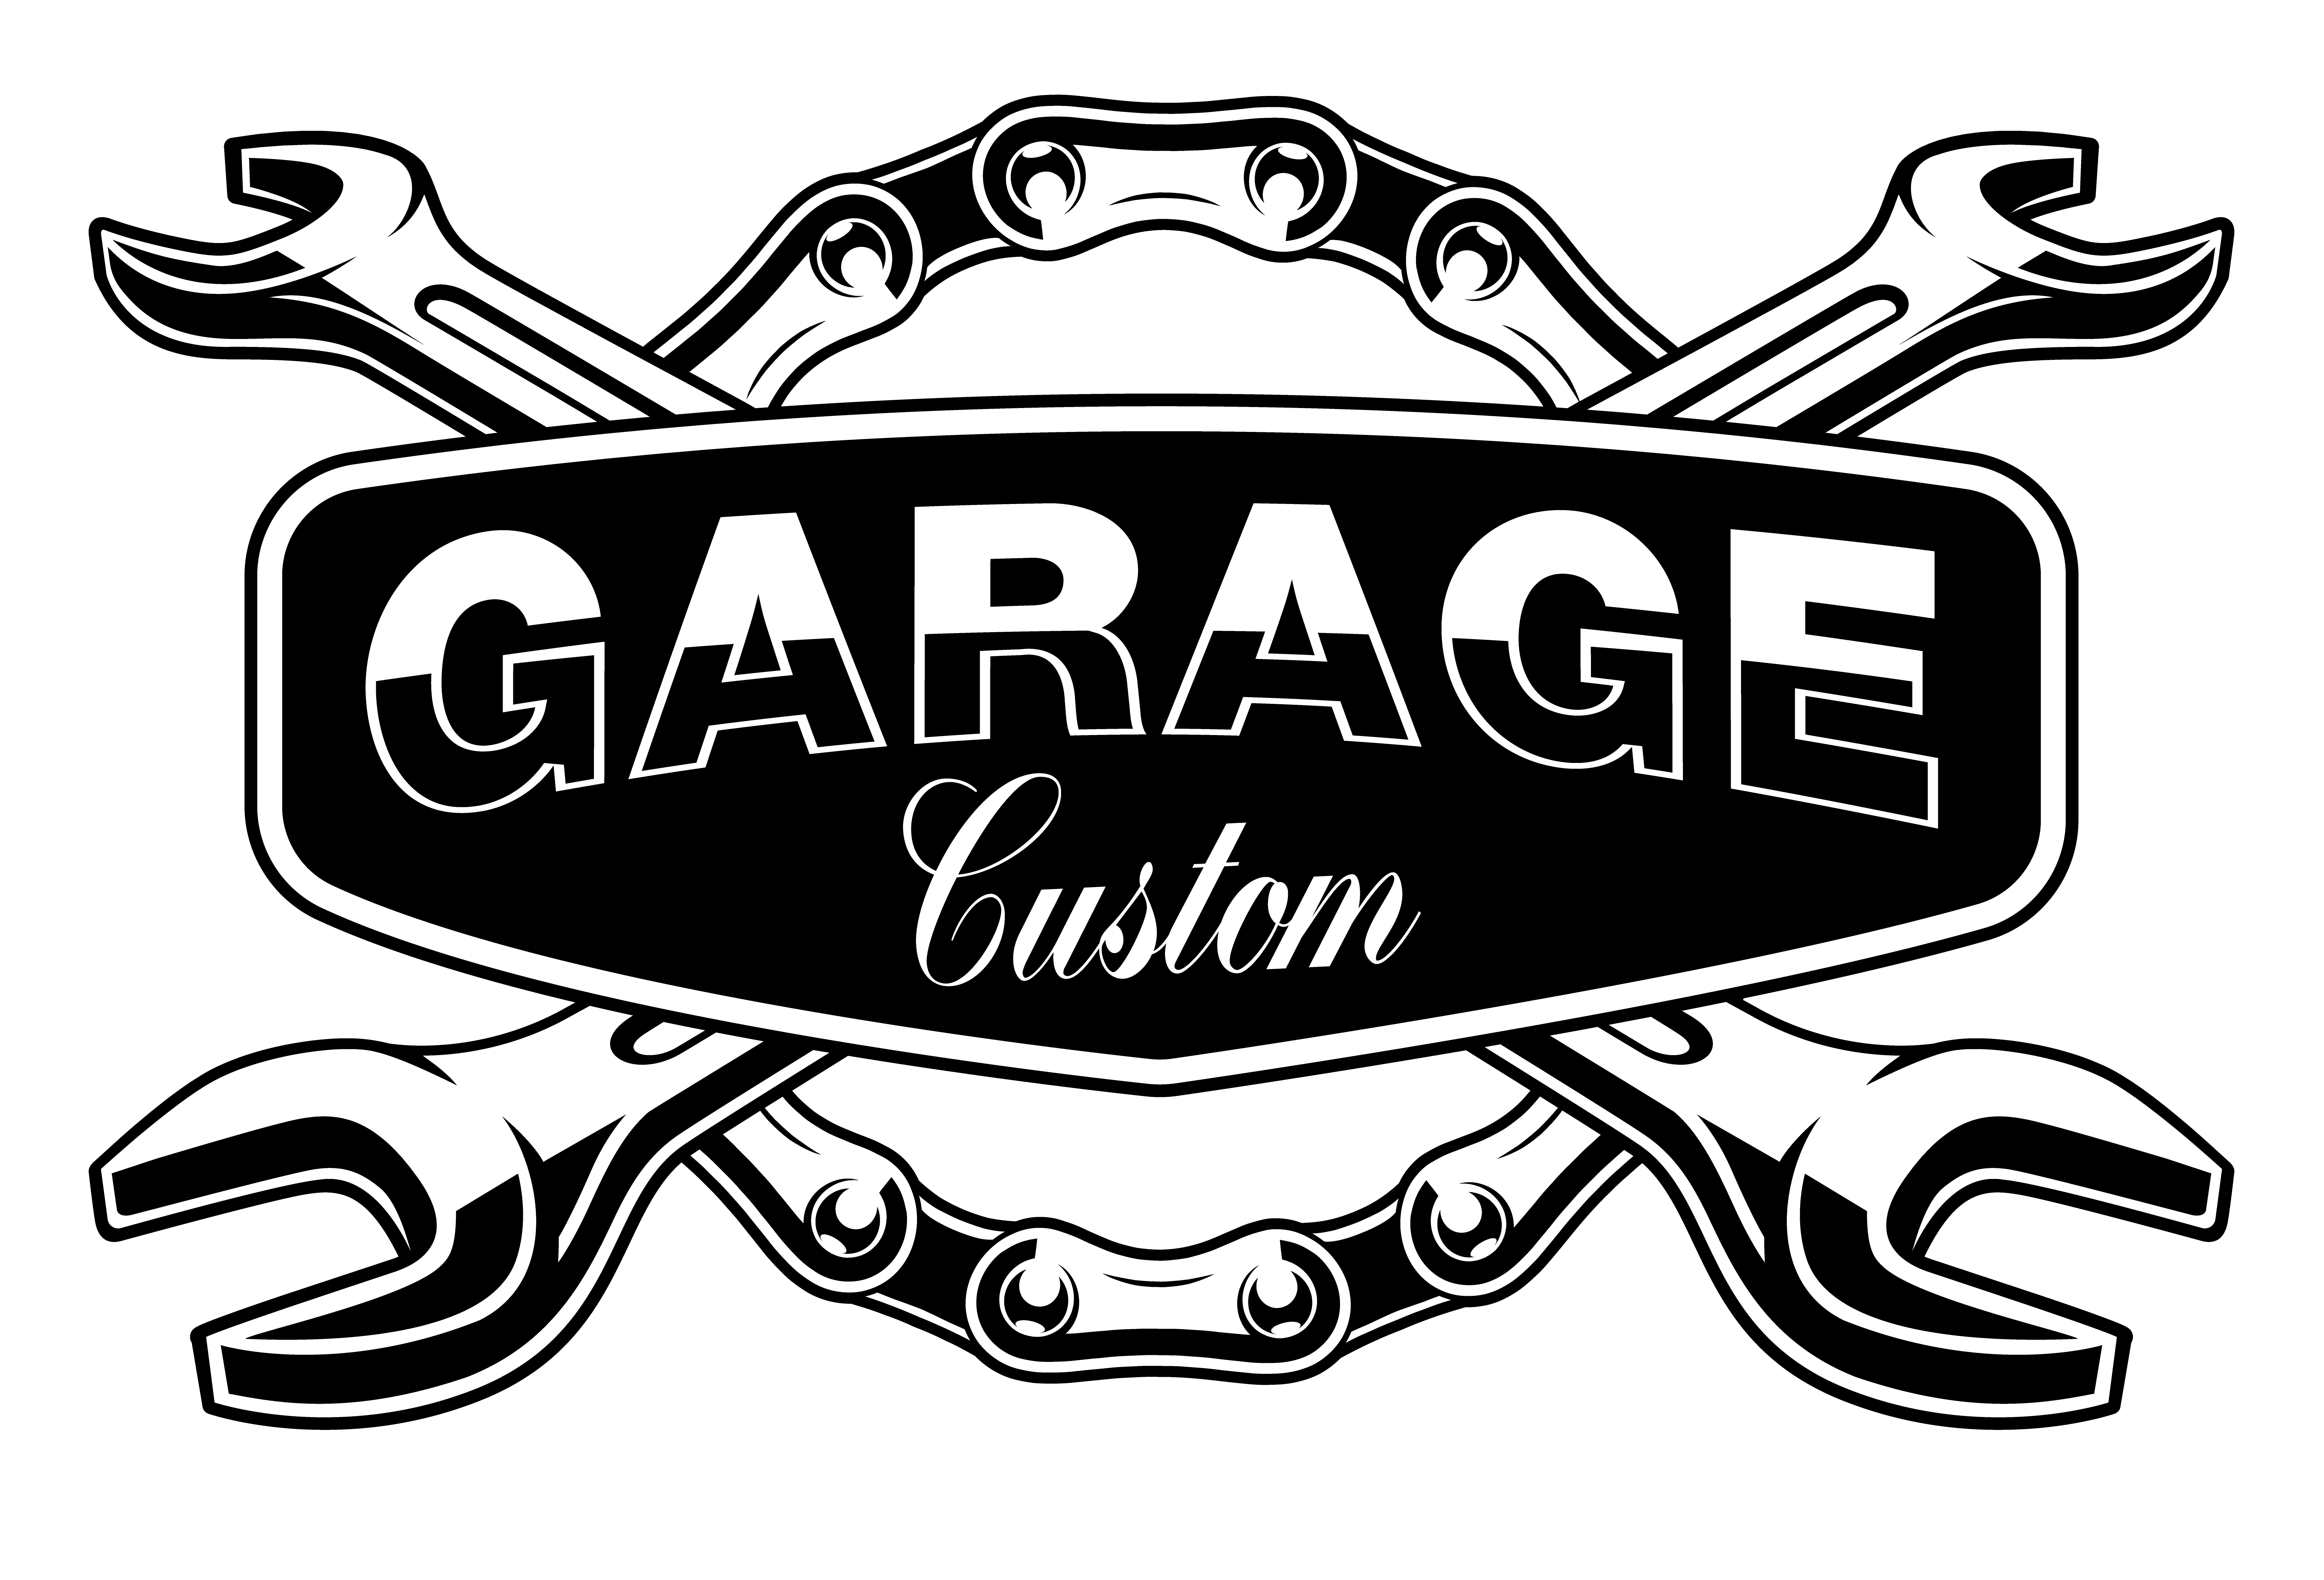 Garage emblem with motorcycle chain.